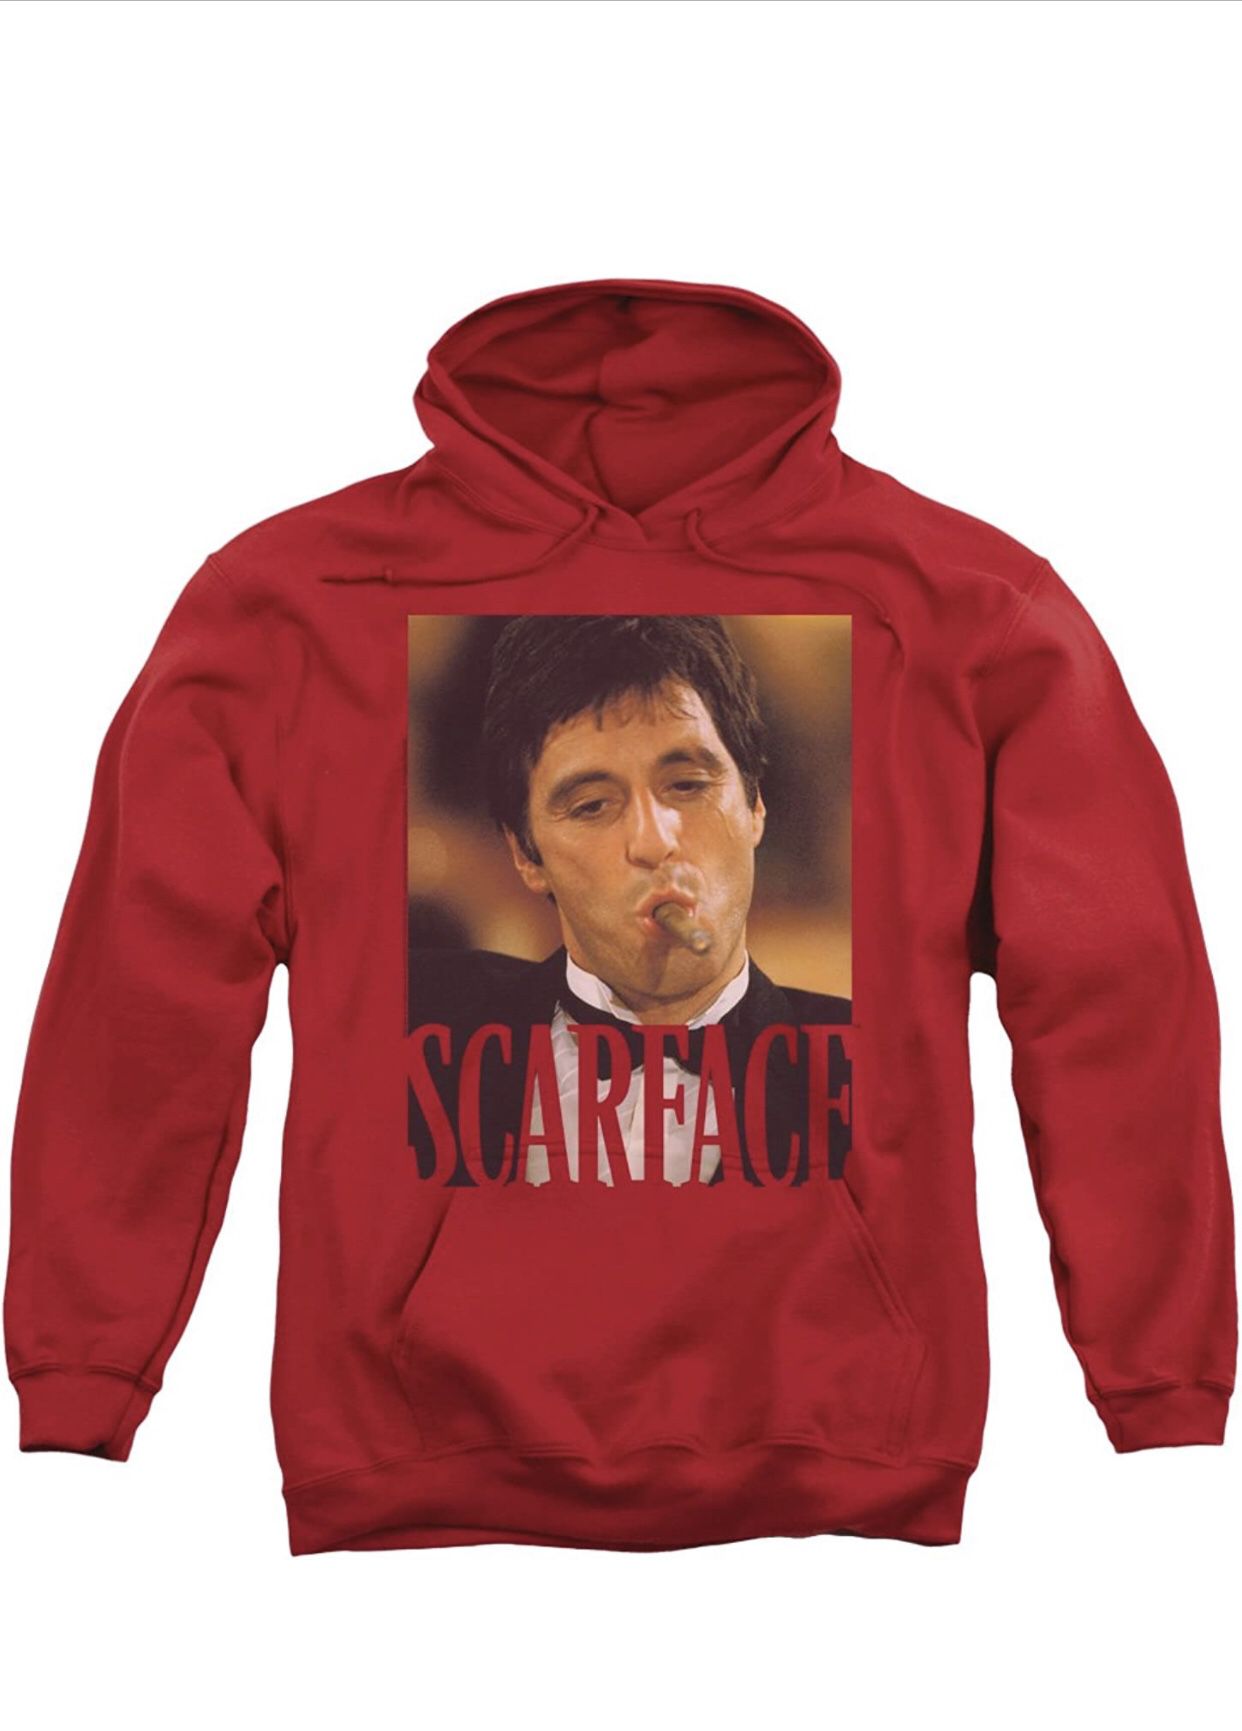 Like New Trevco Scarface Smoking Cigar Unisex Adult Pull-Over Hoodie for Men and Women